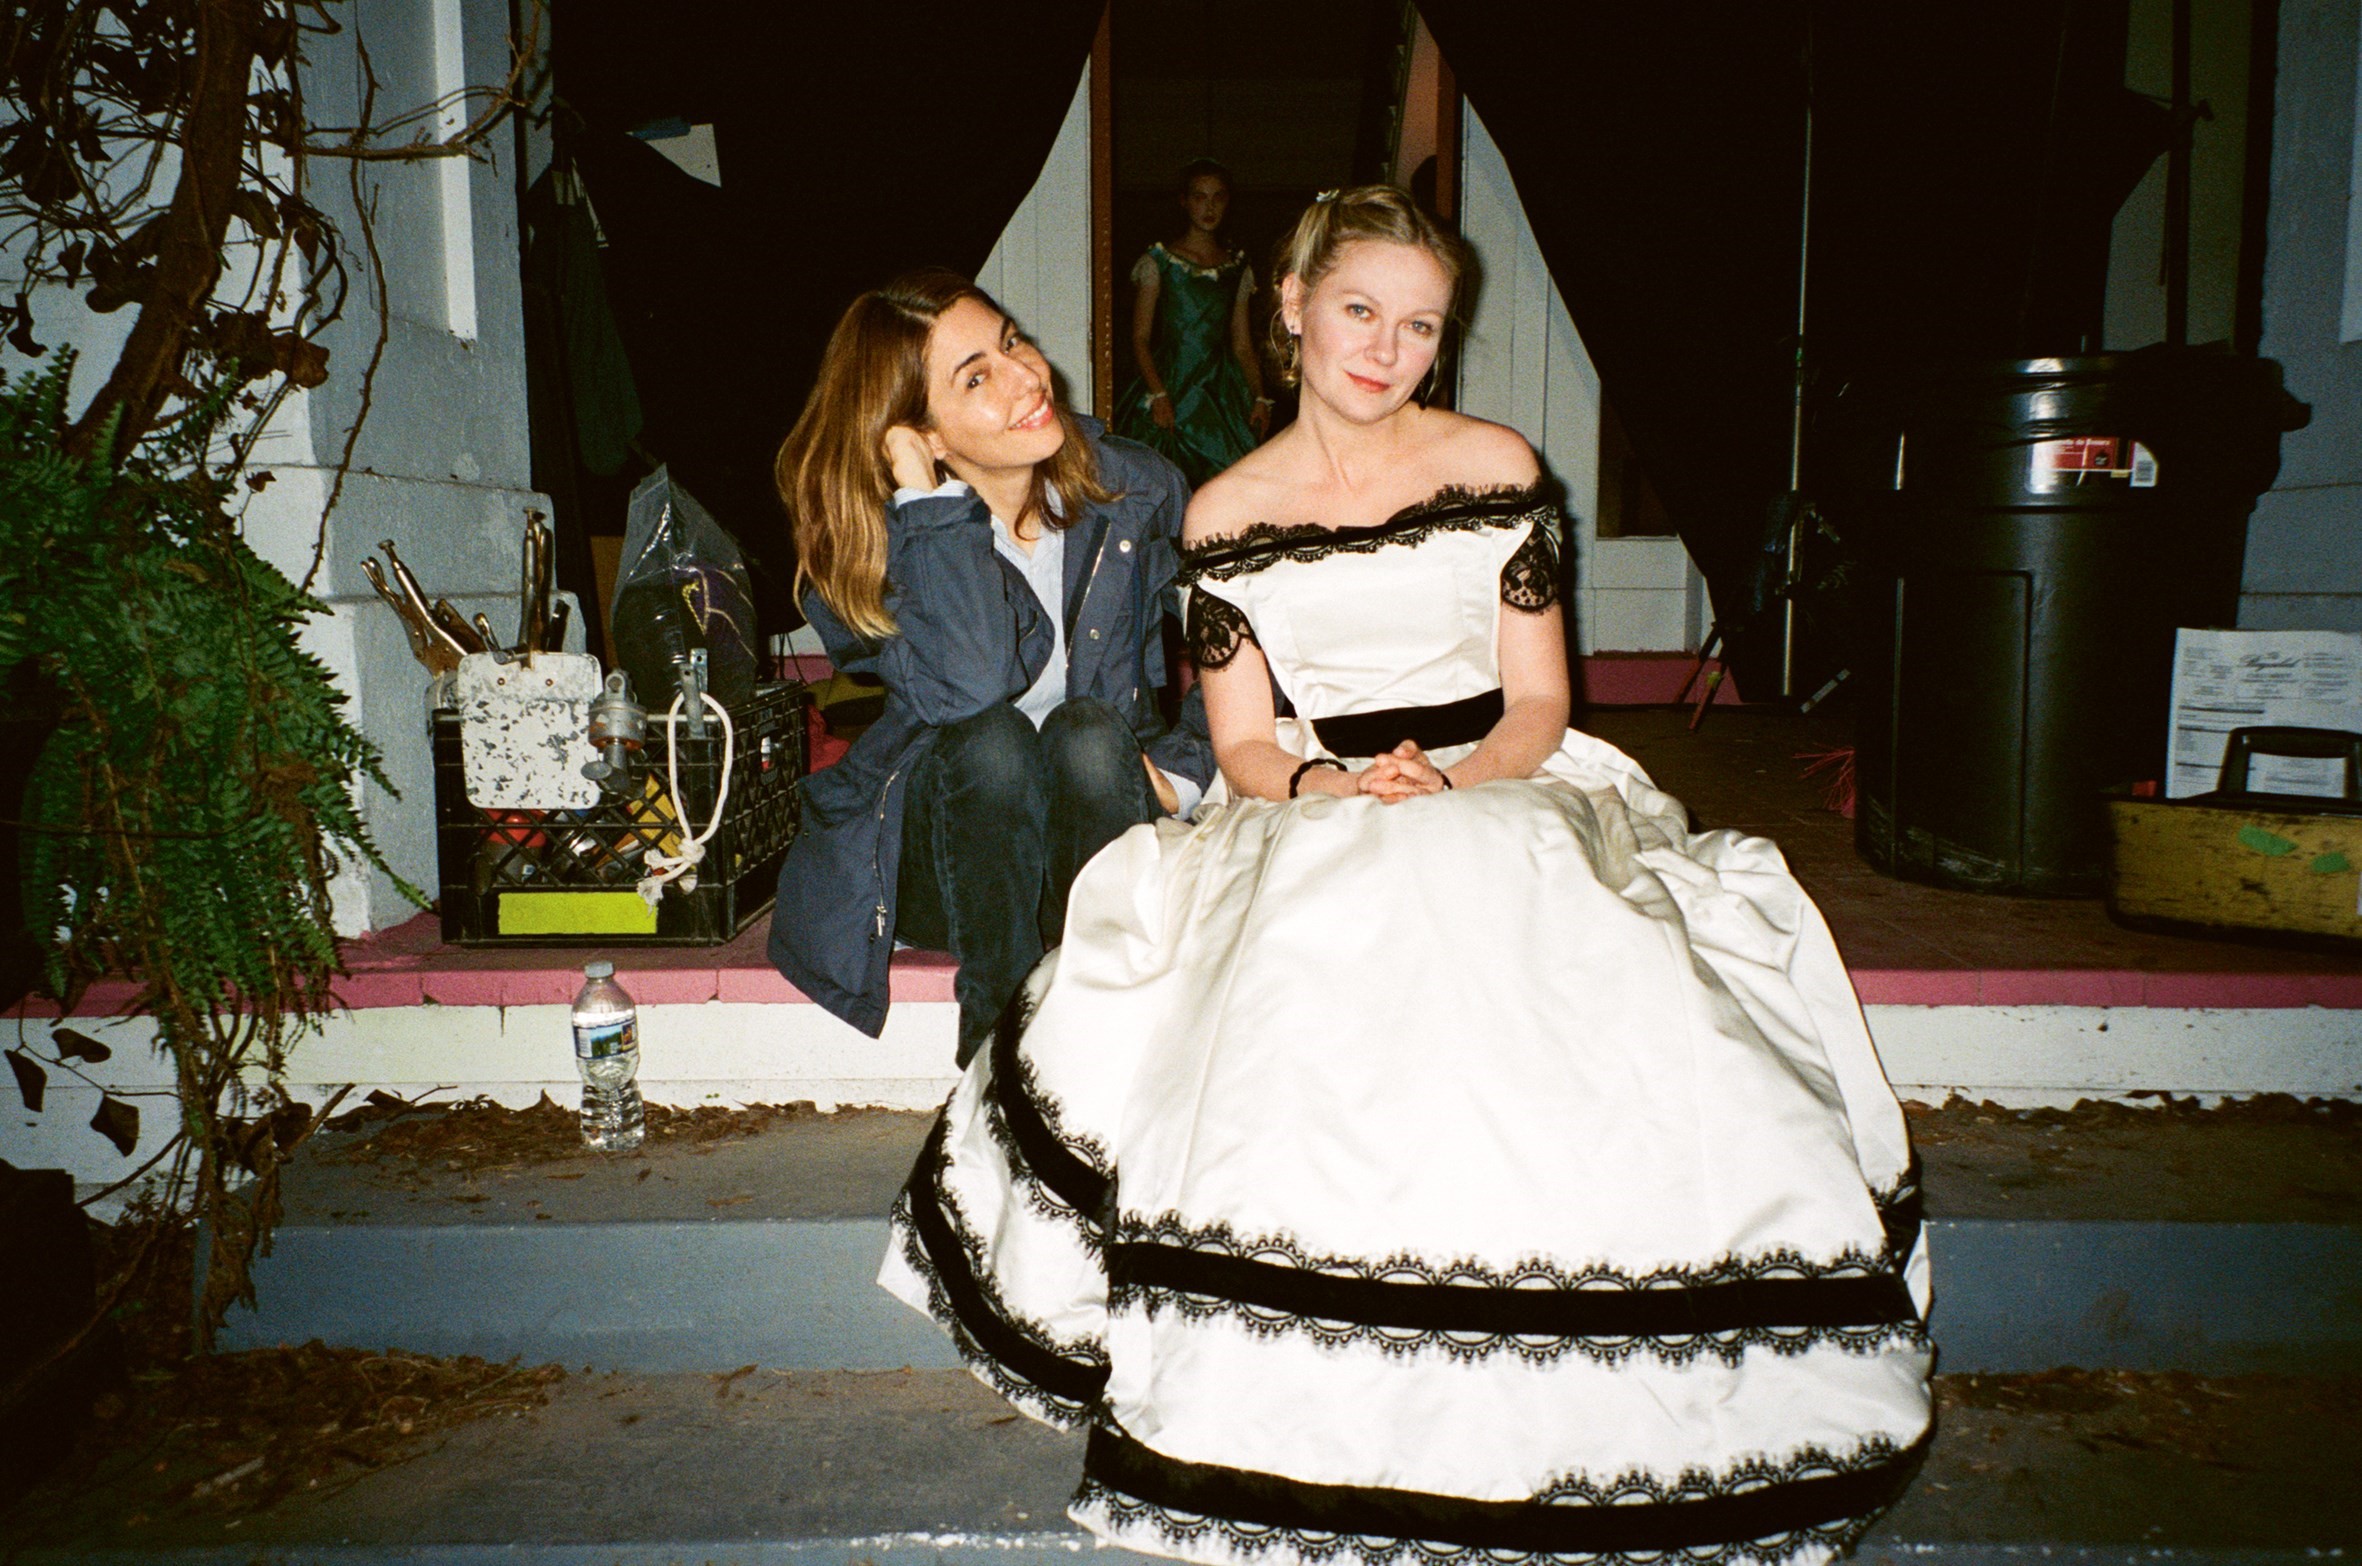 Sofia Coppola on the Photographs that Inspired Her Films